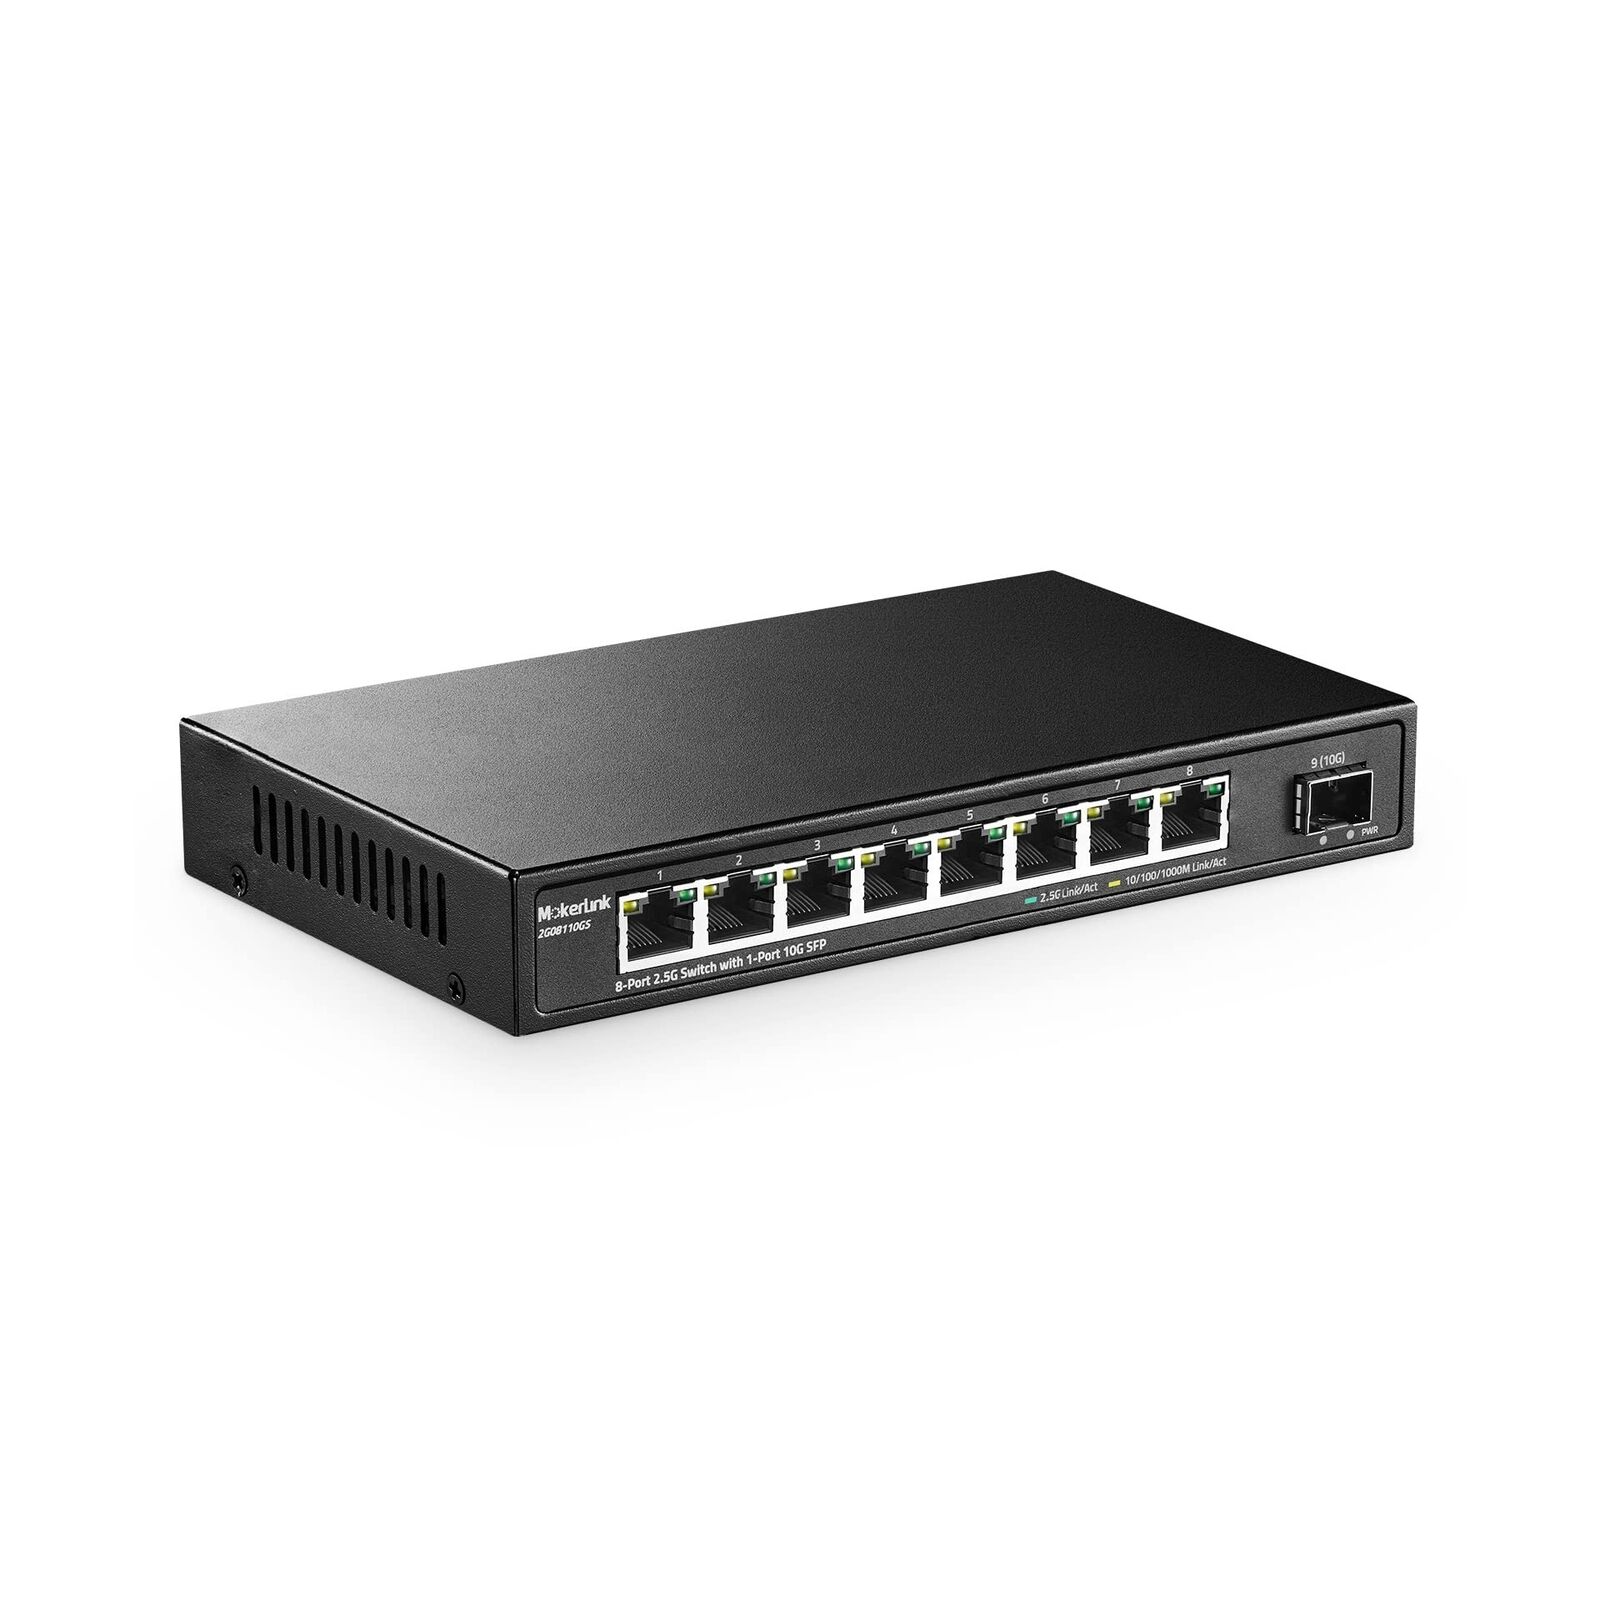 MokerLink 8 Port 2.5G Ethernet Switch with 10G SFP, 8 x 2.5G Base-T Ports Com...